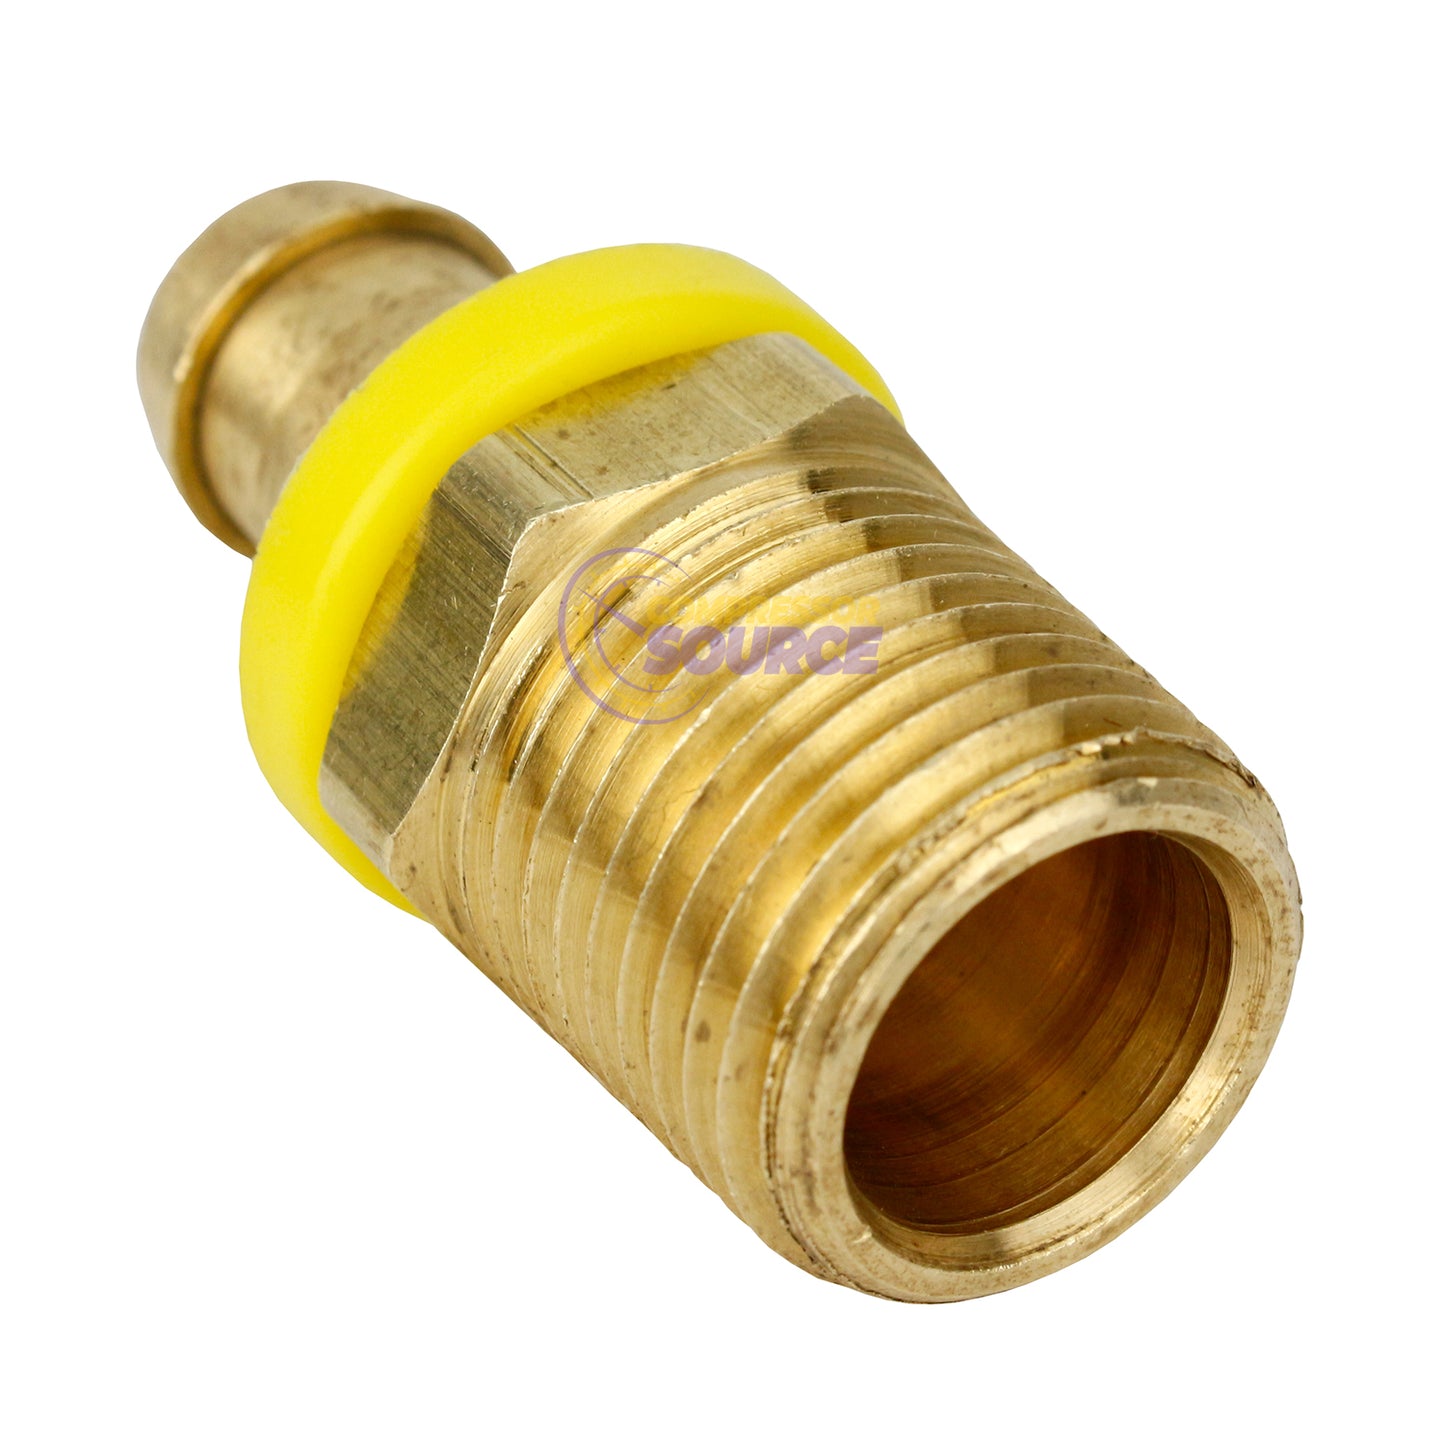 Milton Brass Lock Push-On and Lock Fitting 1/2" Male End 1/2" ID Hose 1704-8